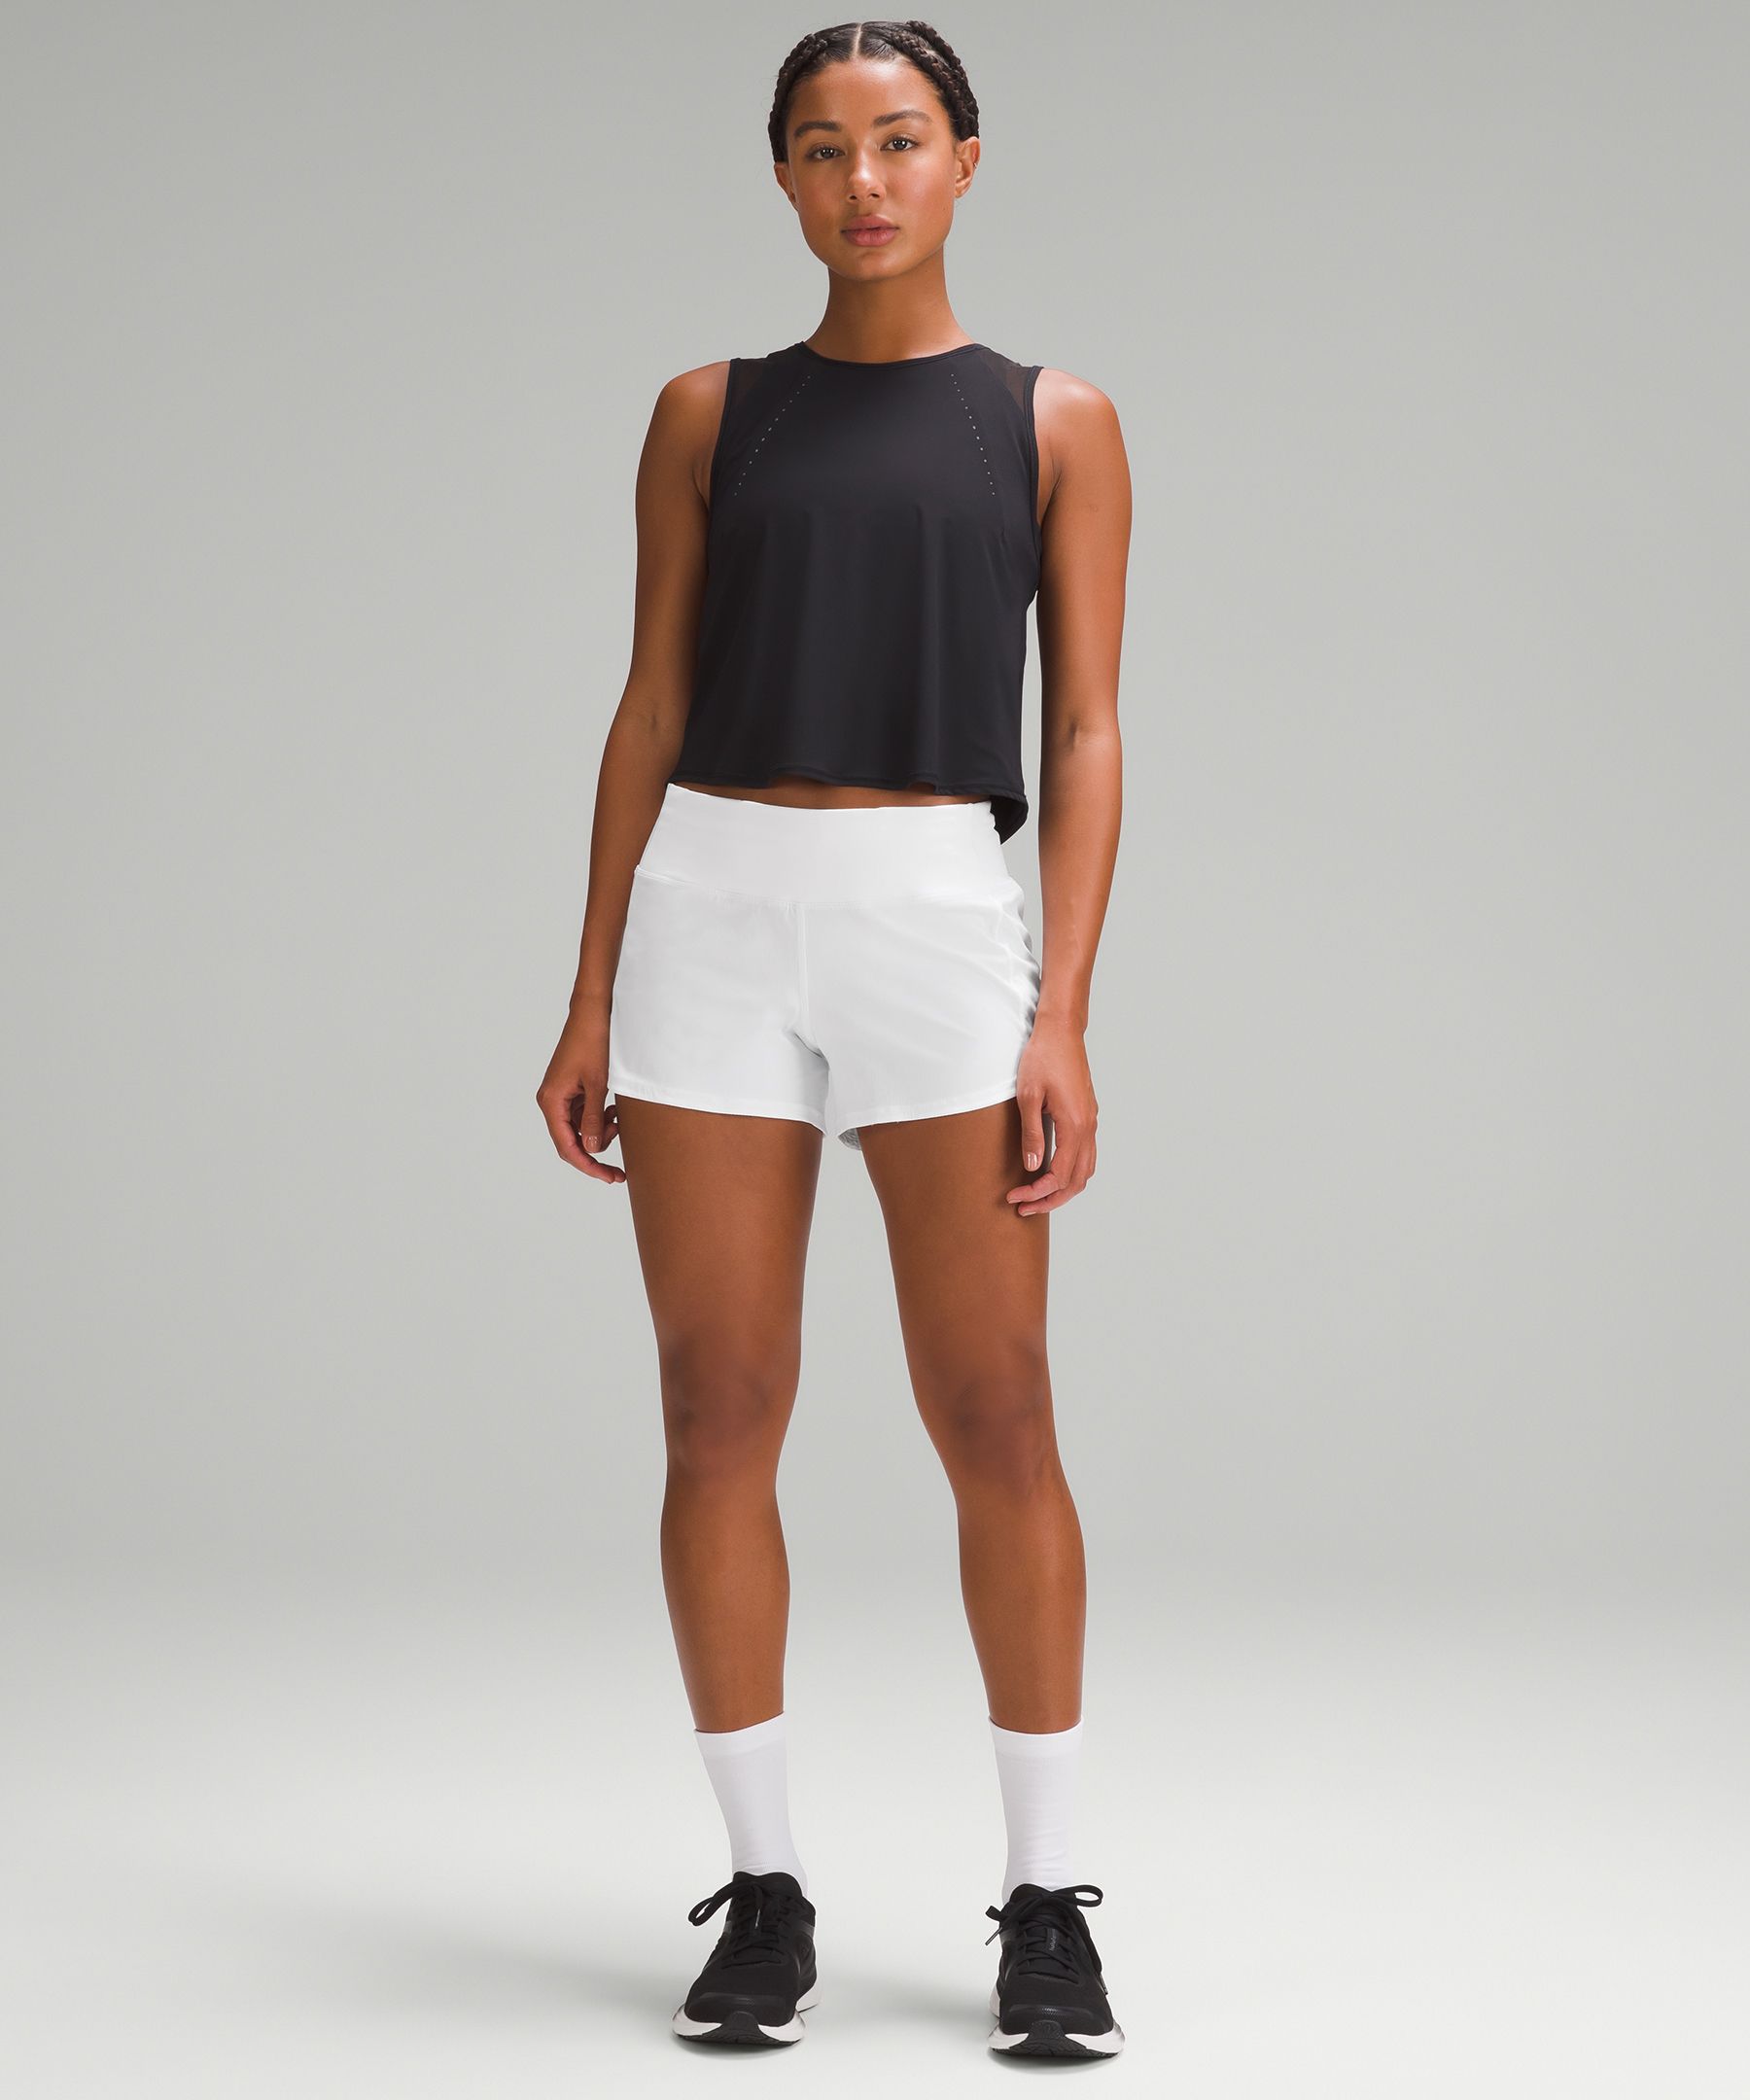 Speed Up Mid-Rise Lined Short 4, Women's Shorts